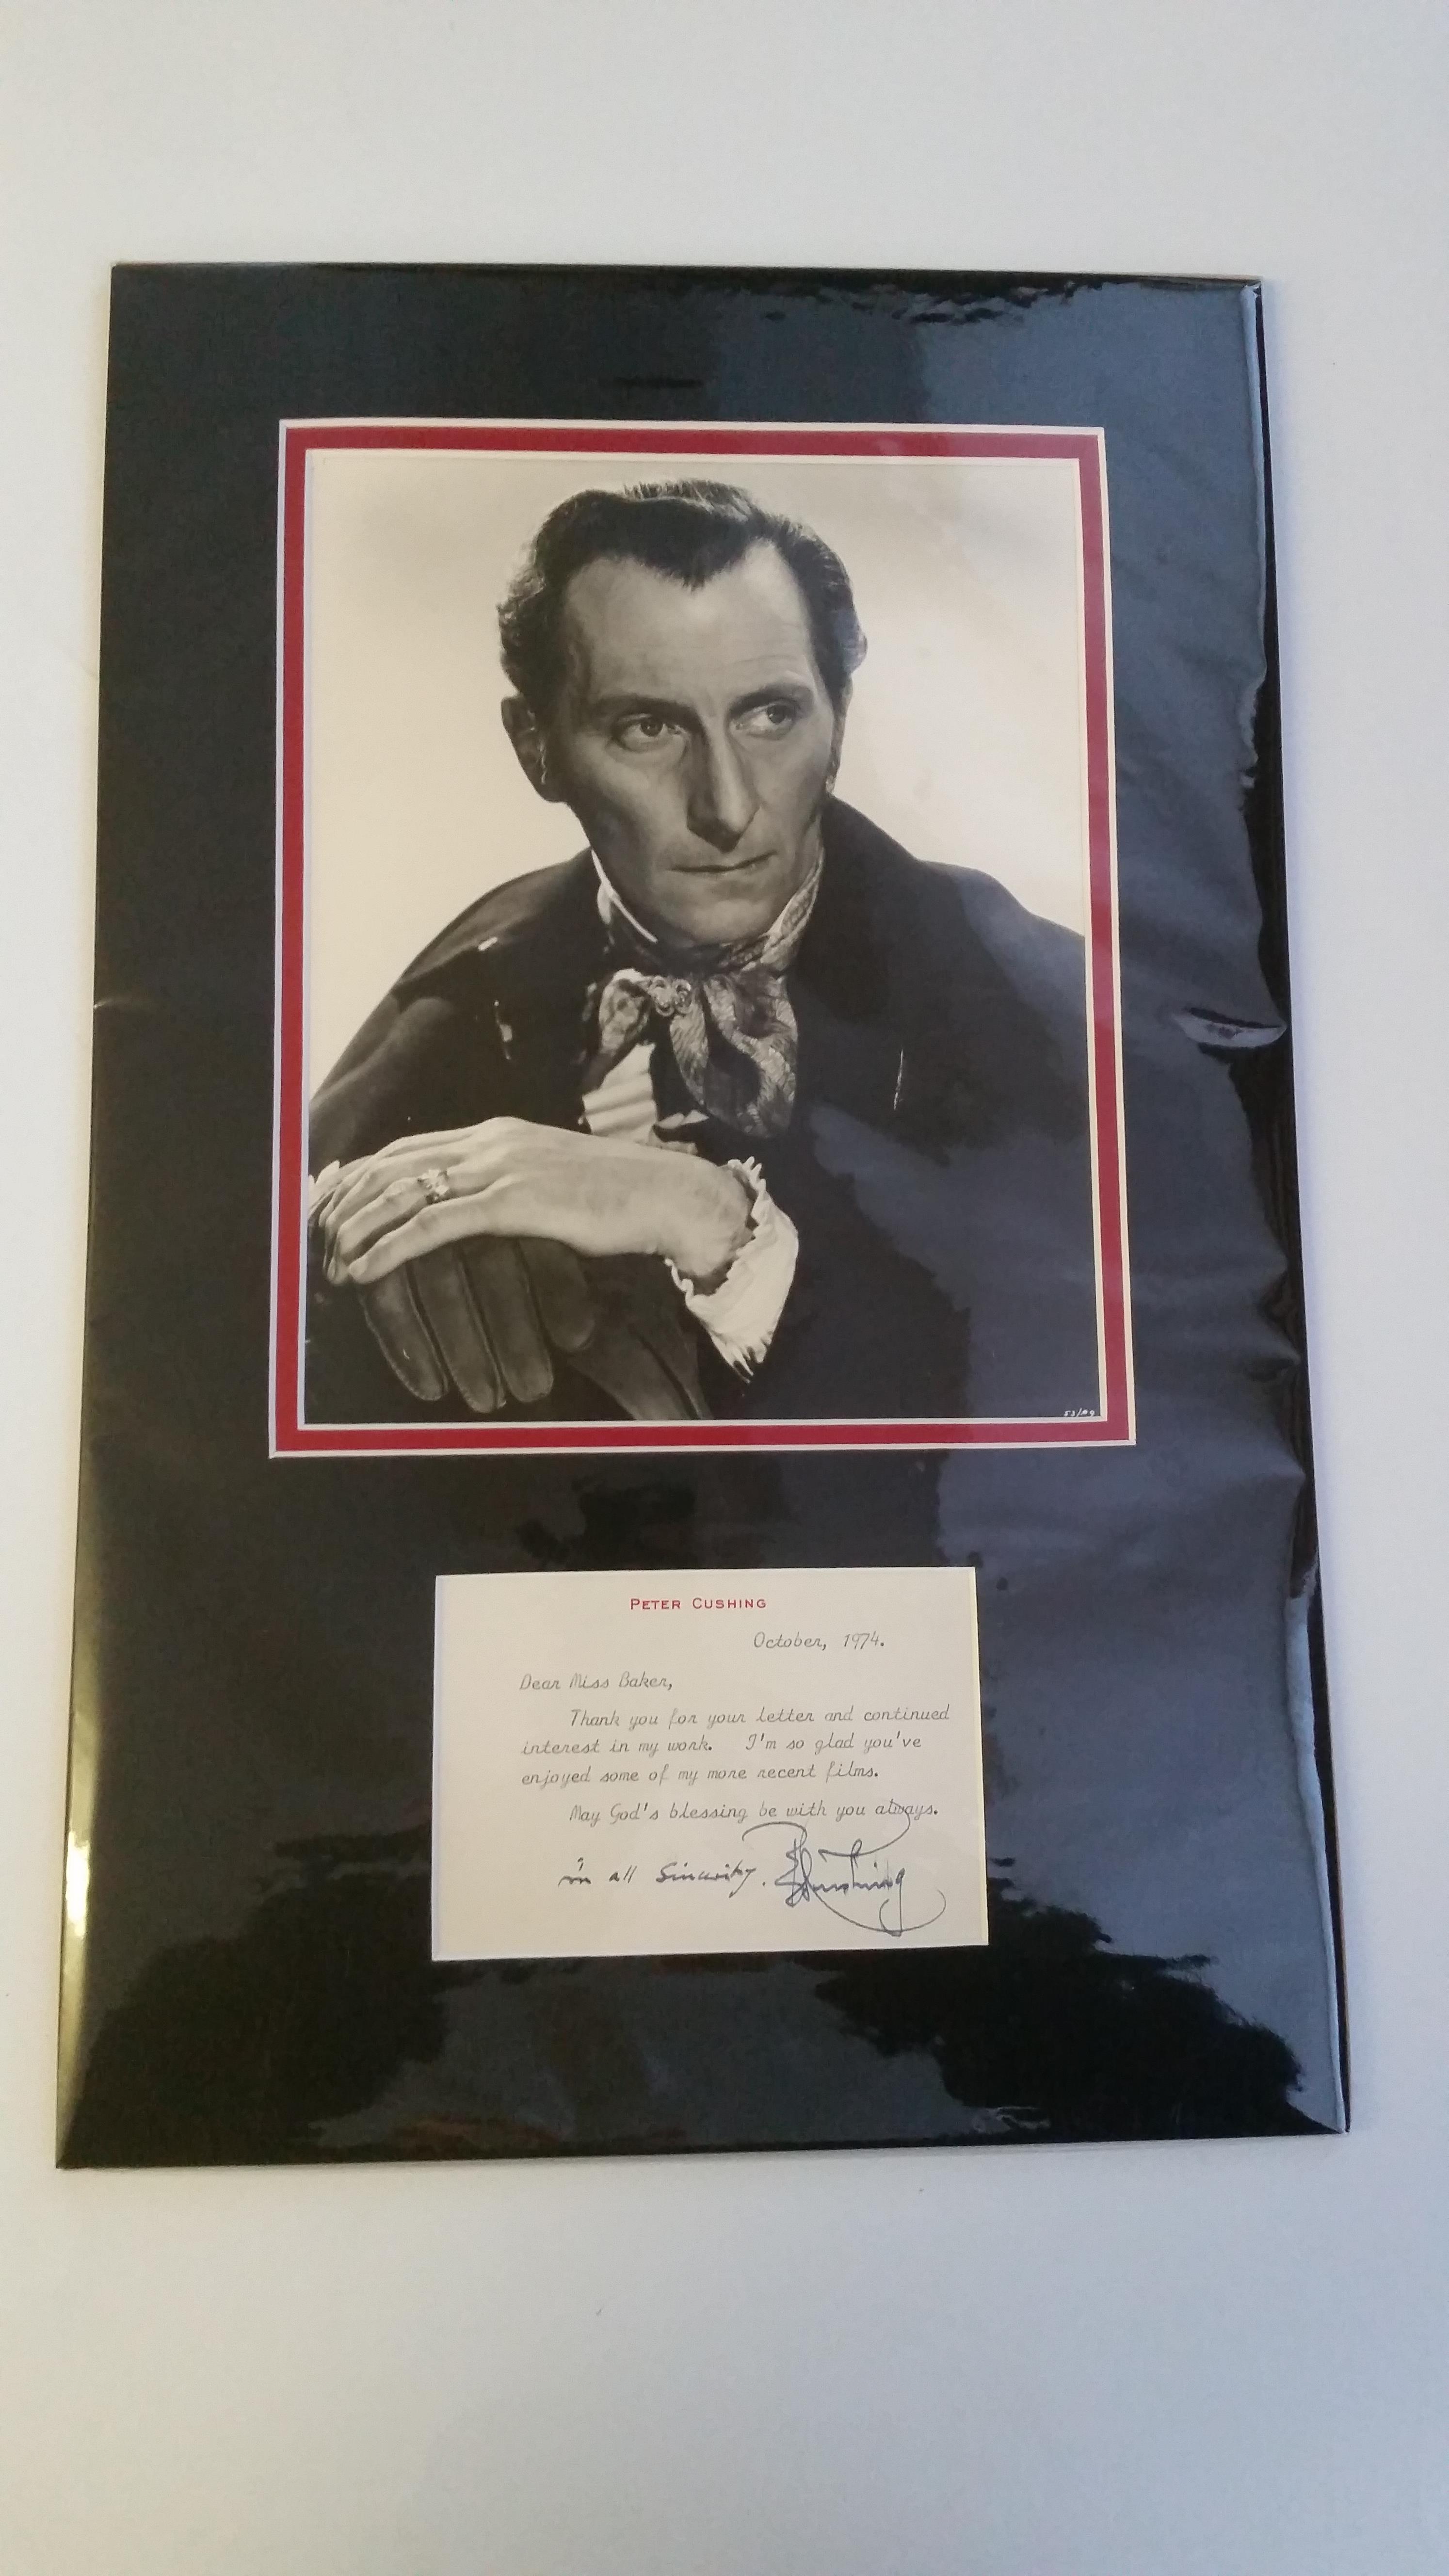 CINEMA, signed correspondance card by Peter Cushing, October 1974, overmounted beneath photo, h/s in